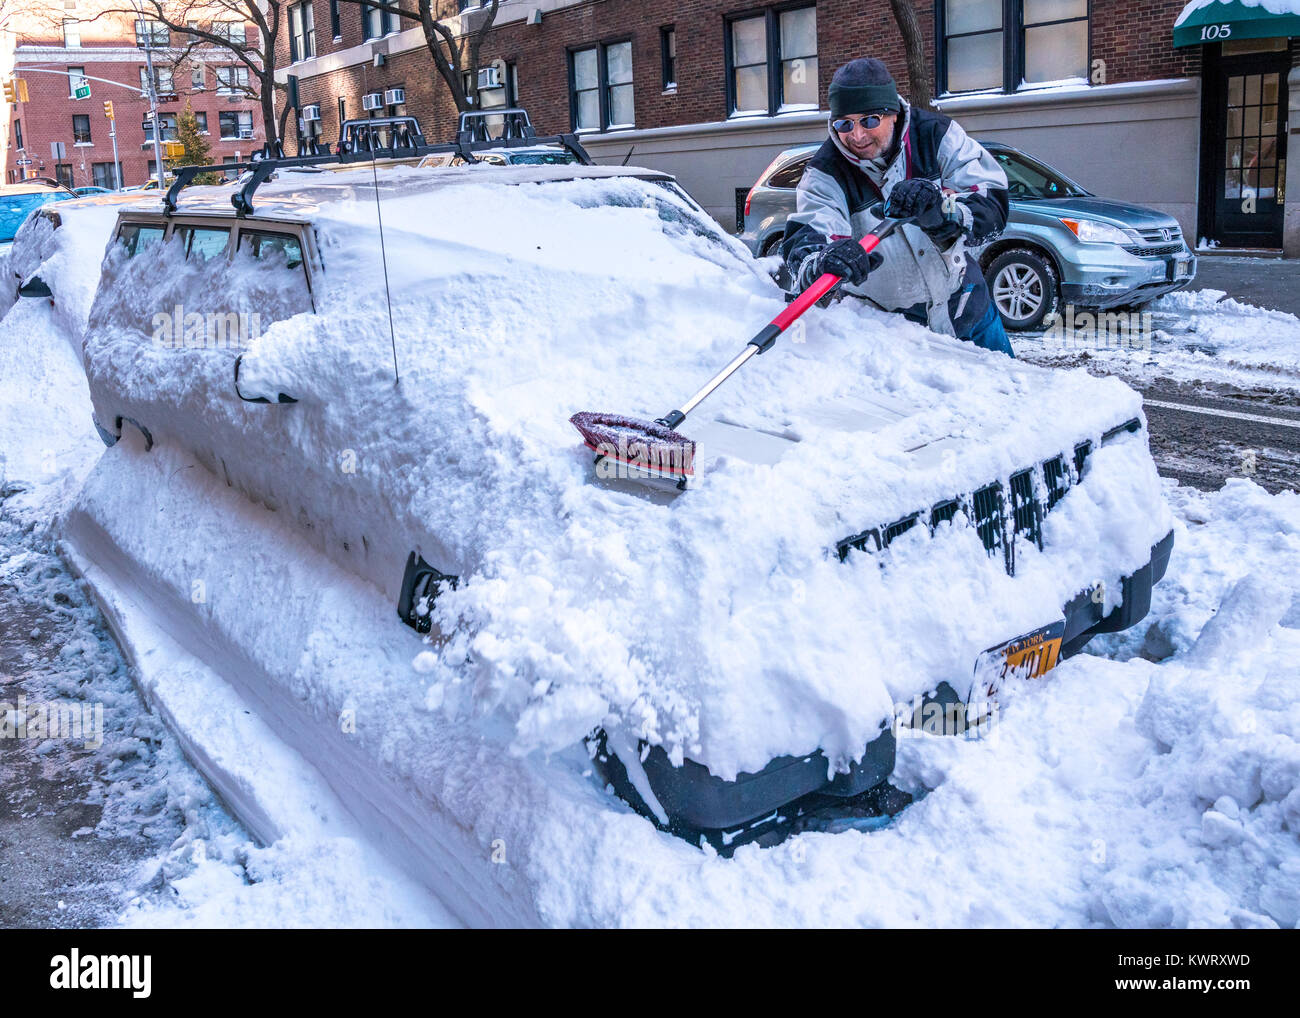 New York, USA. 5th Jan, 2018. A resident clears his snow-covered car in New York's Upper East Side after a 'bombogenesis' or 'bomb cyclone' blizzard brought record snow, bitter cold and strong winds over the city. Credit: Enrique Shore/Alamy Live News Stock Photo